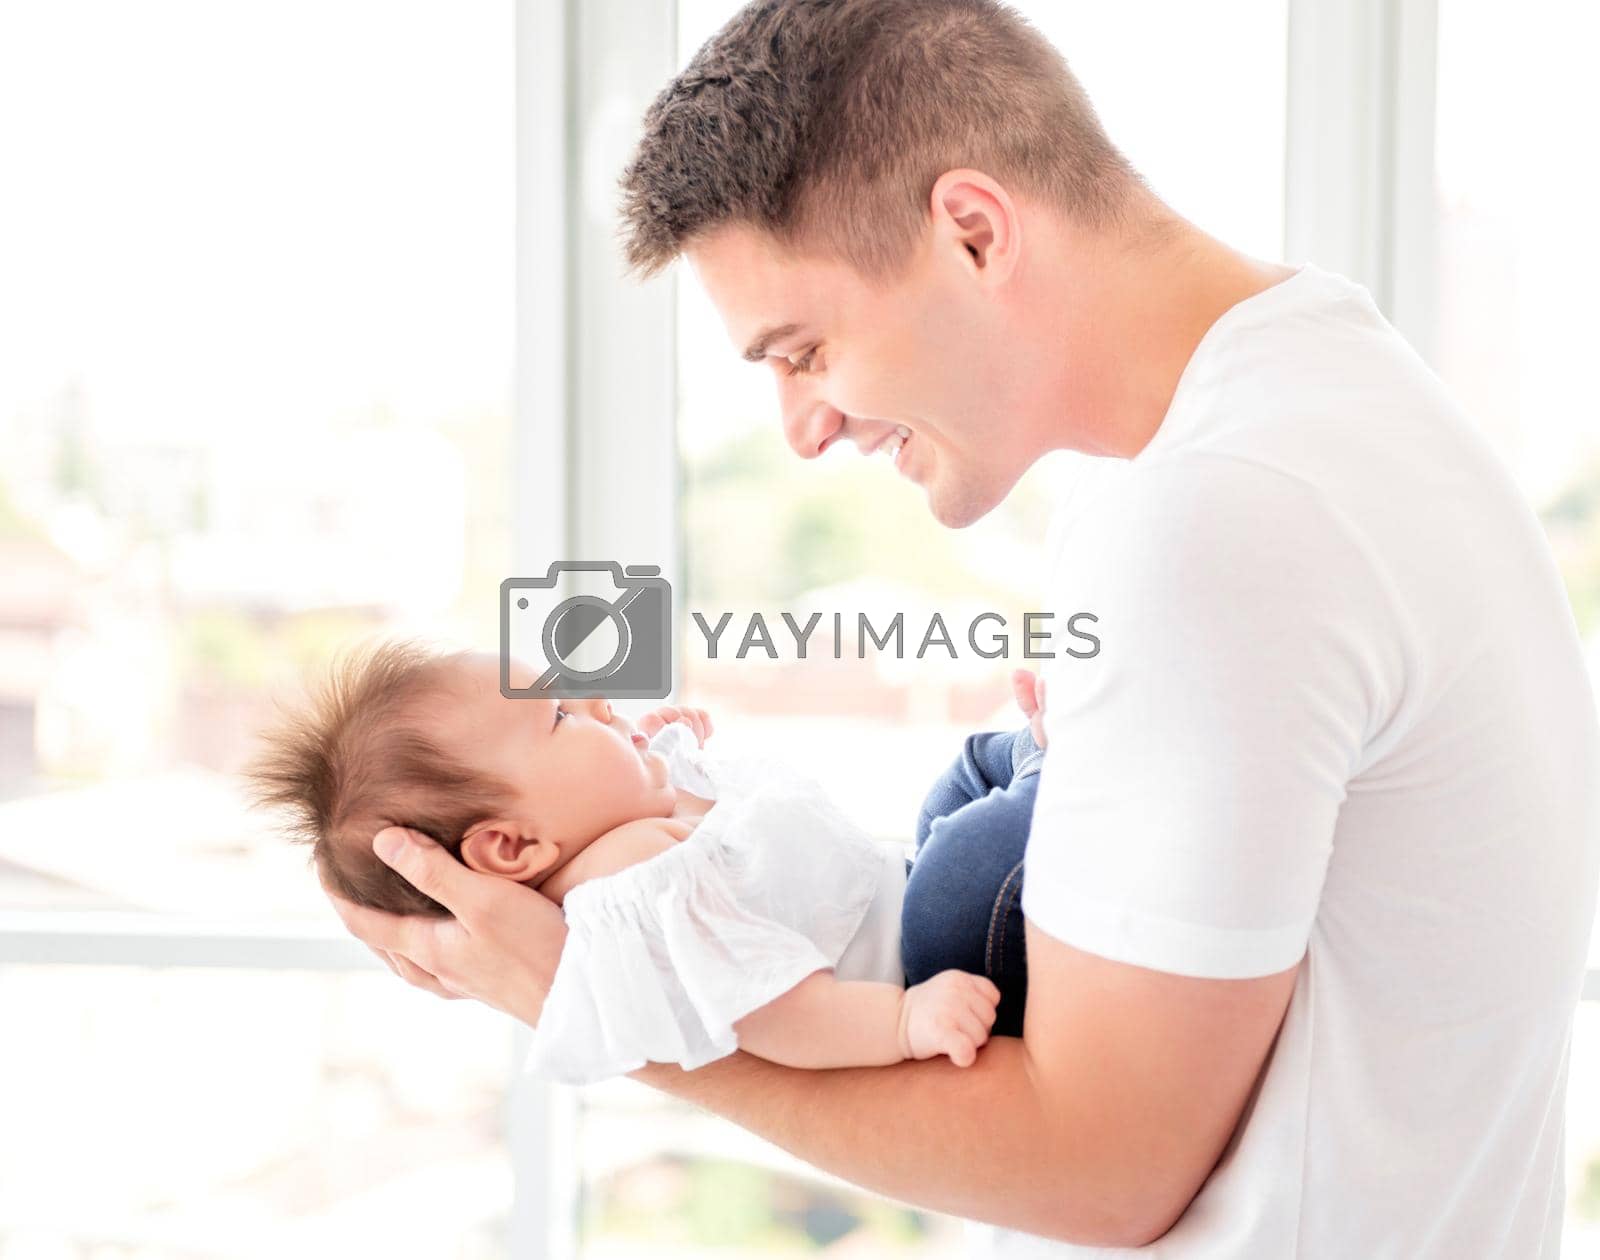 Royalty free image of Father embracing infant by tan4ikk1